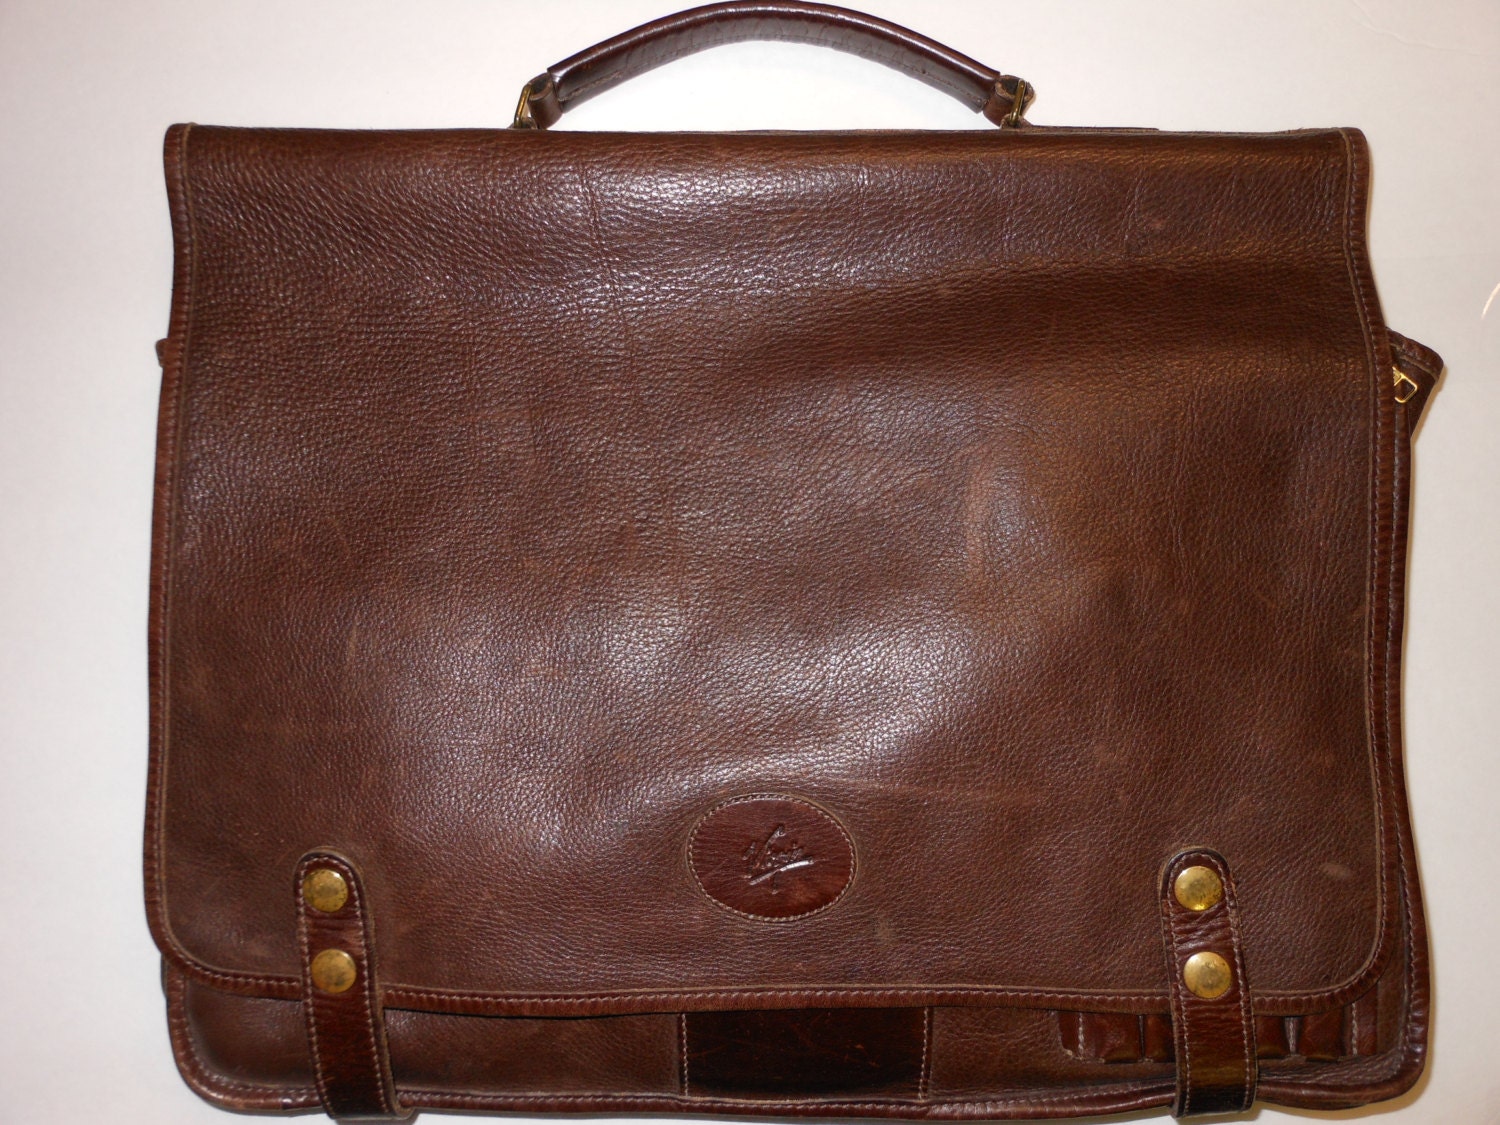 Messenger leather bag Roots Canada